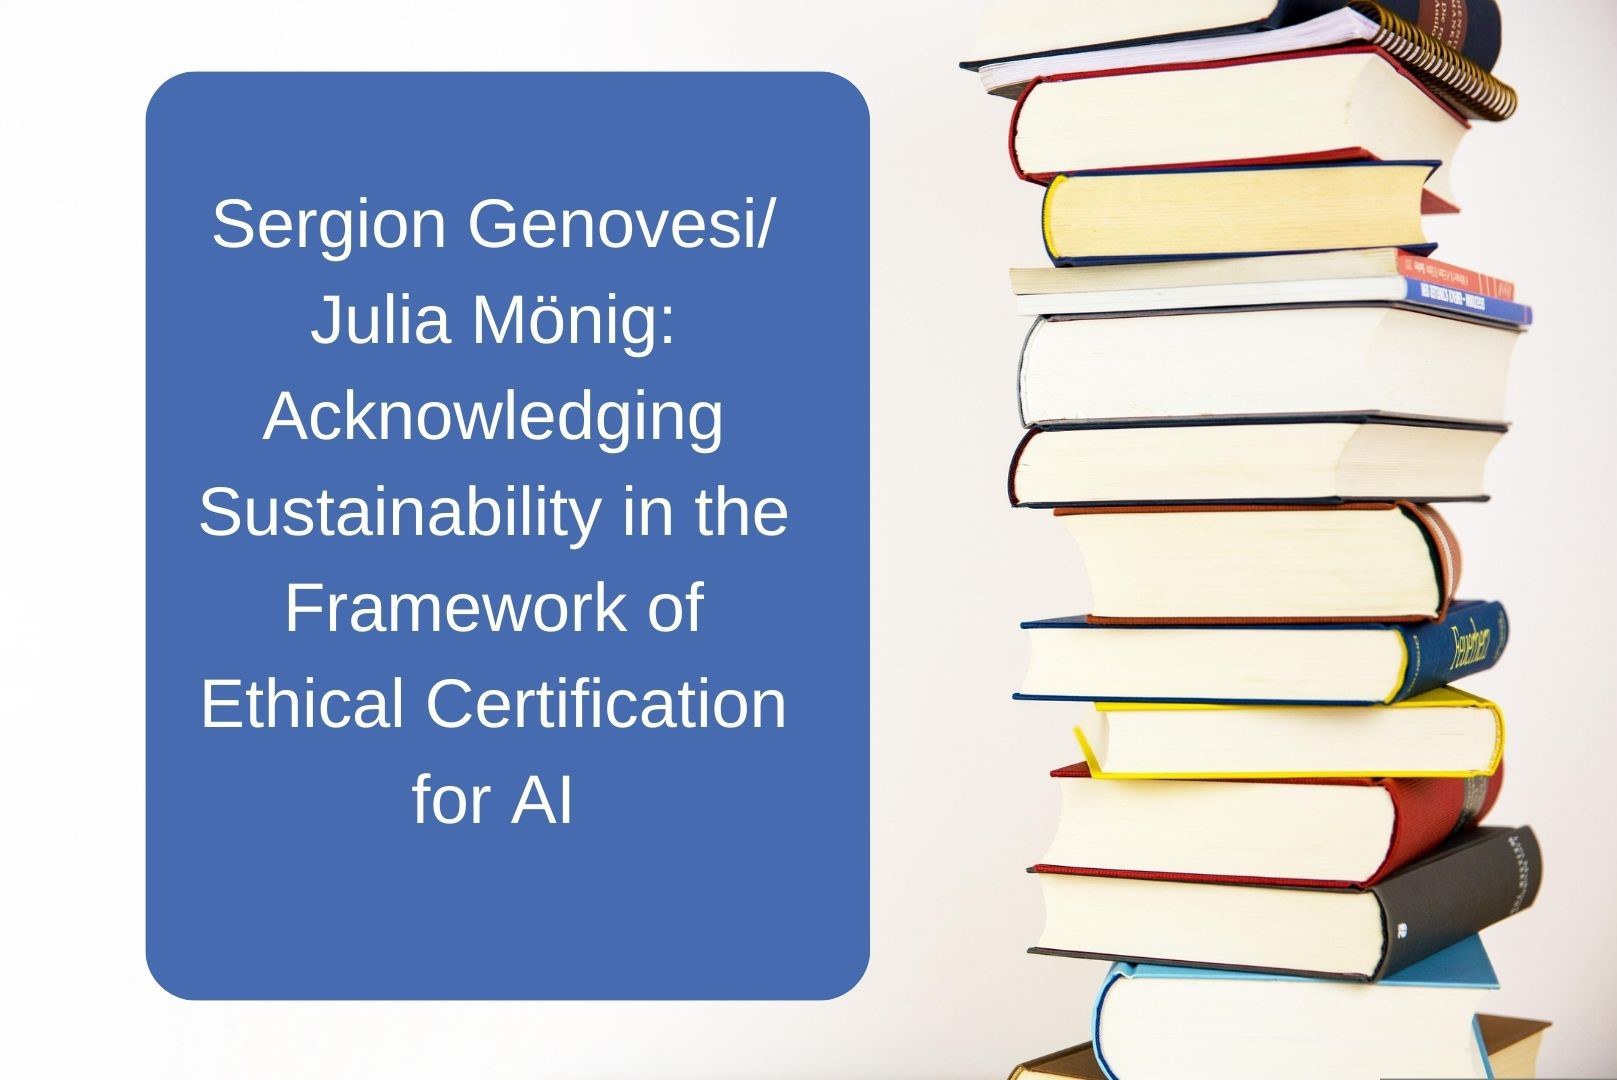 Sergion Genovesi Julia Mönig Acknowledging Sustainability in the Framework of Ethical Certification for AI.jpg